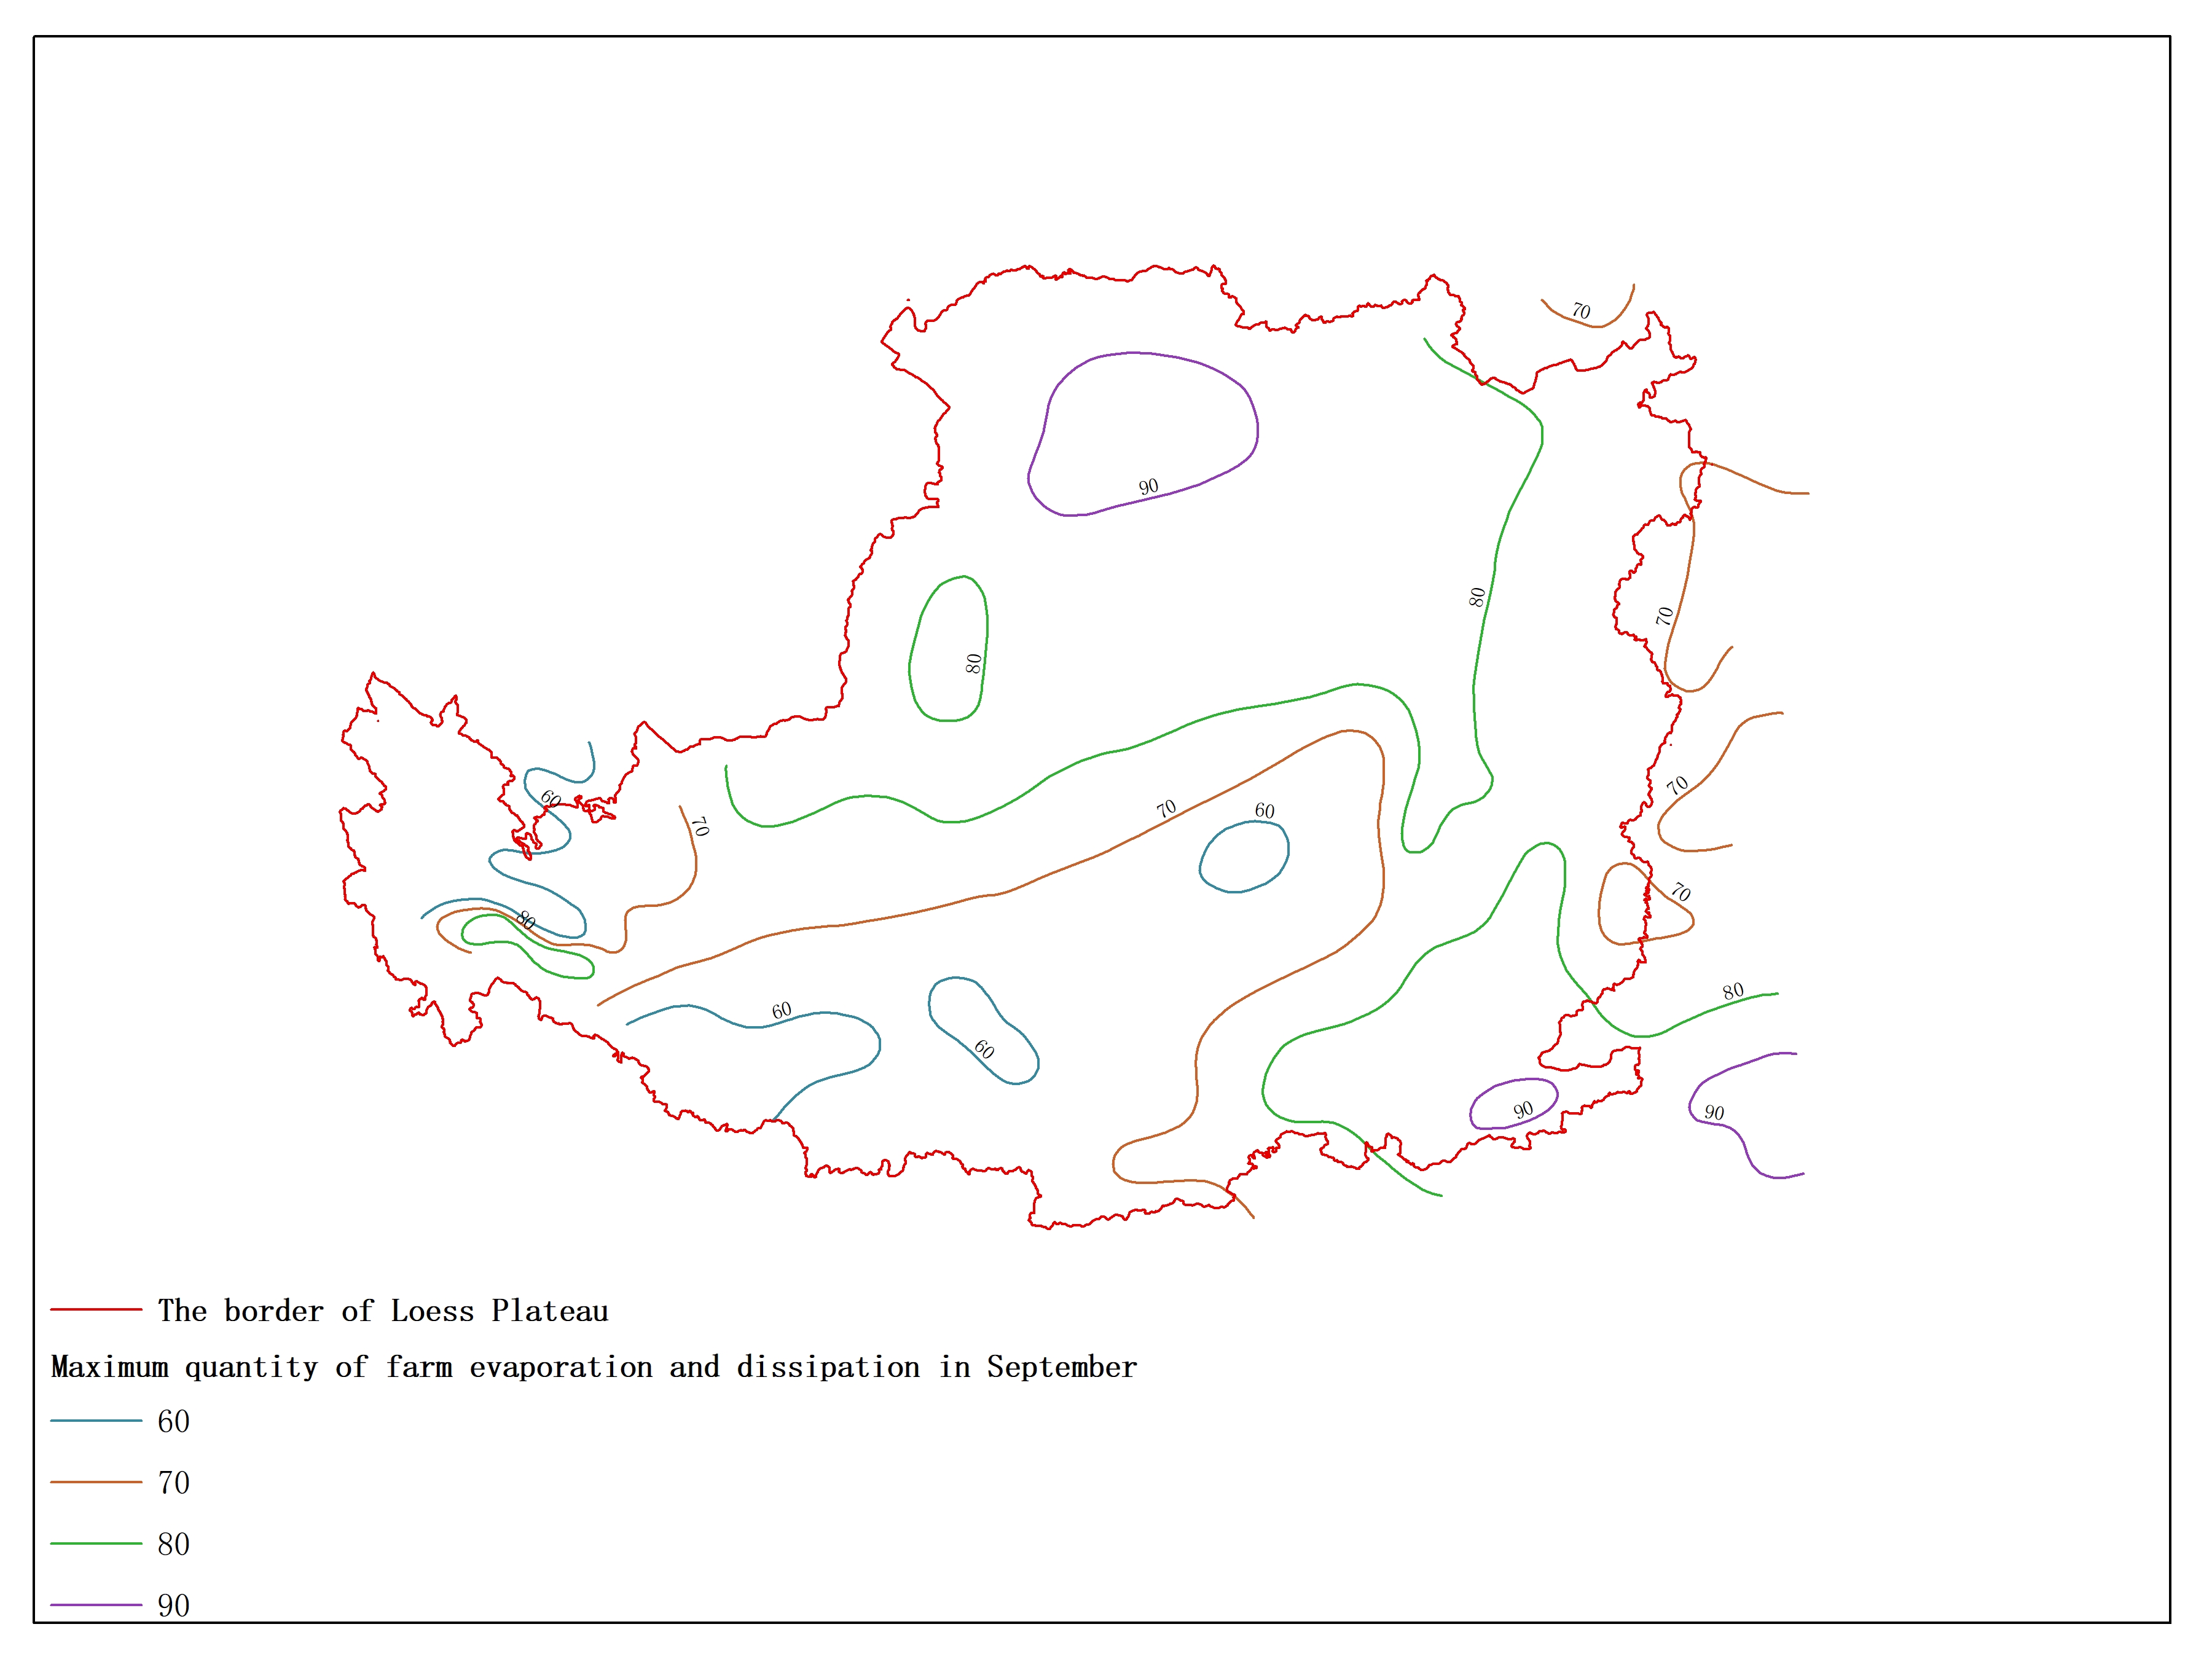 Agricultural climate resource atlas of Loess Plateau-Maximum quantity of farm evaporation and dissipation in September